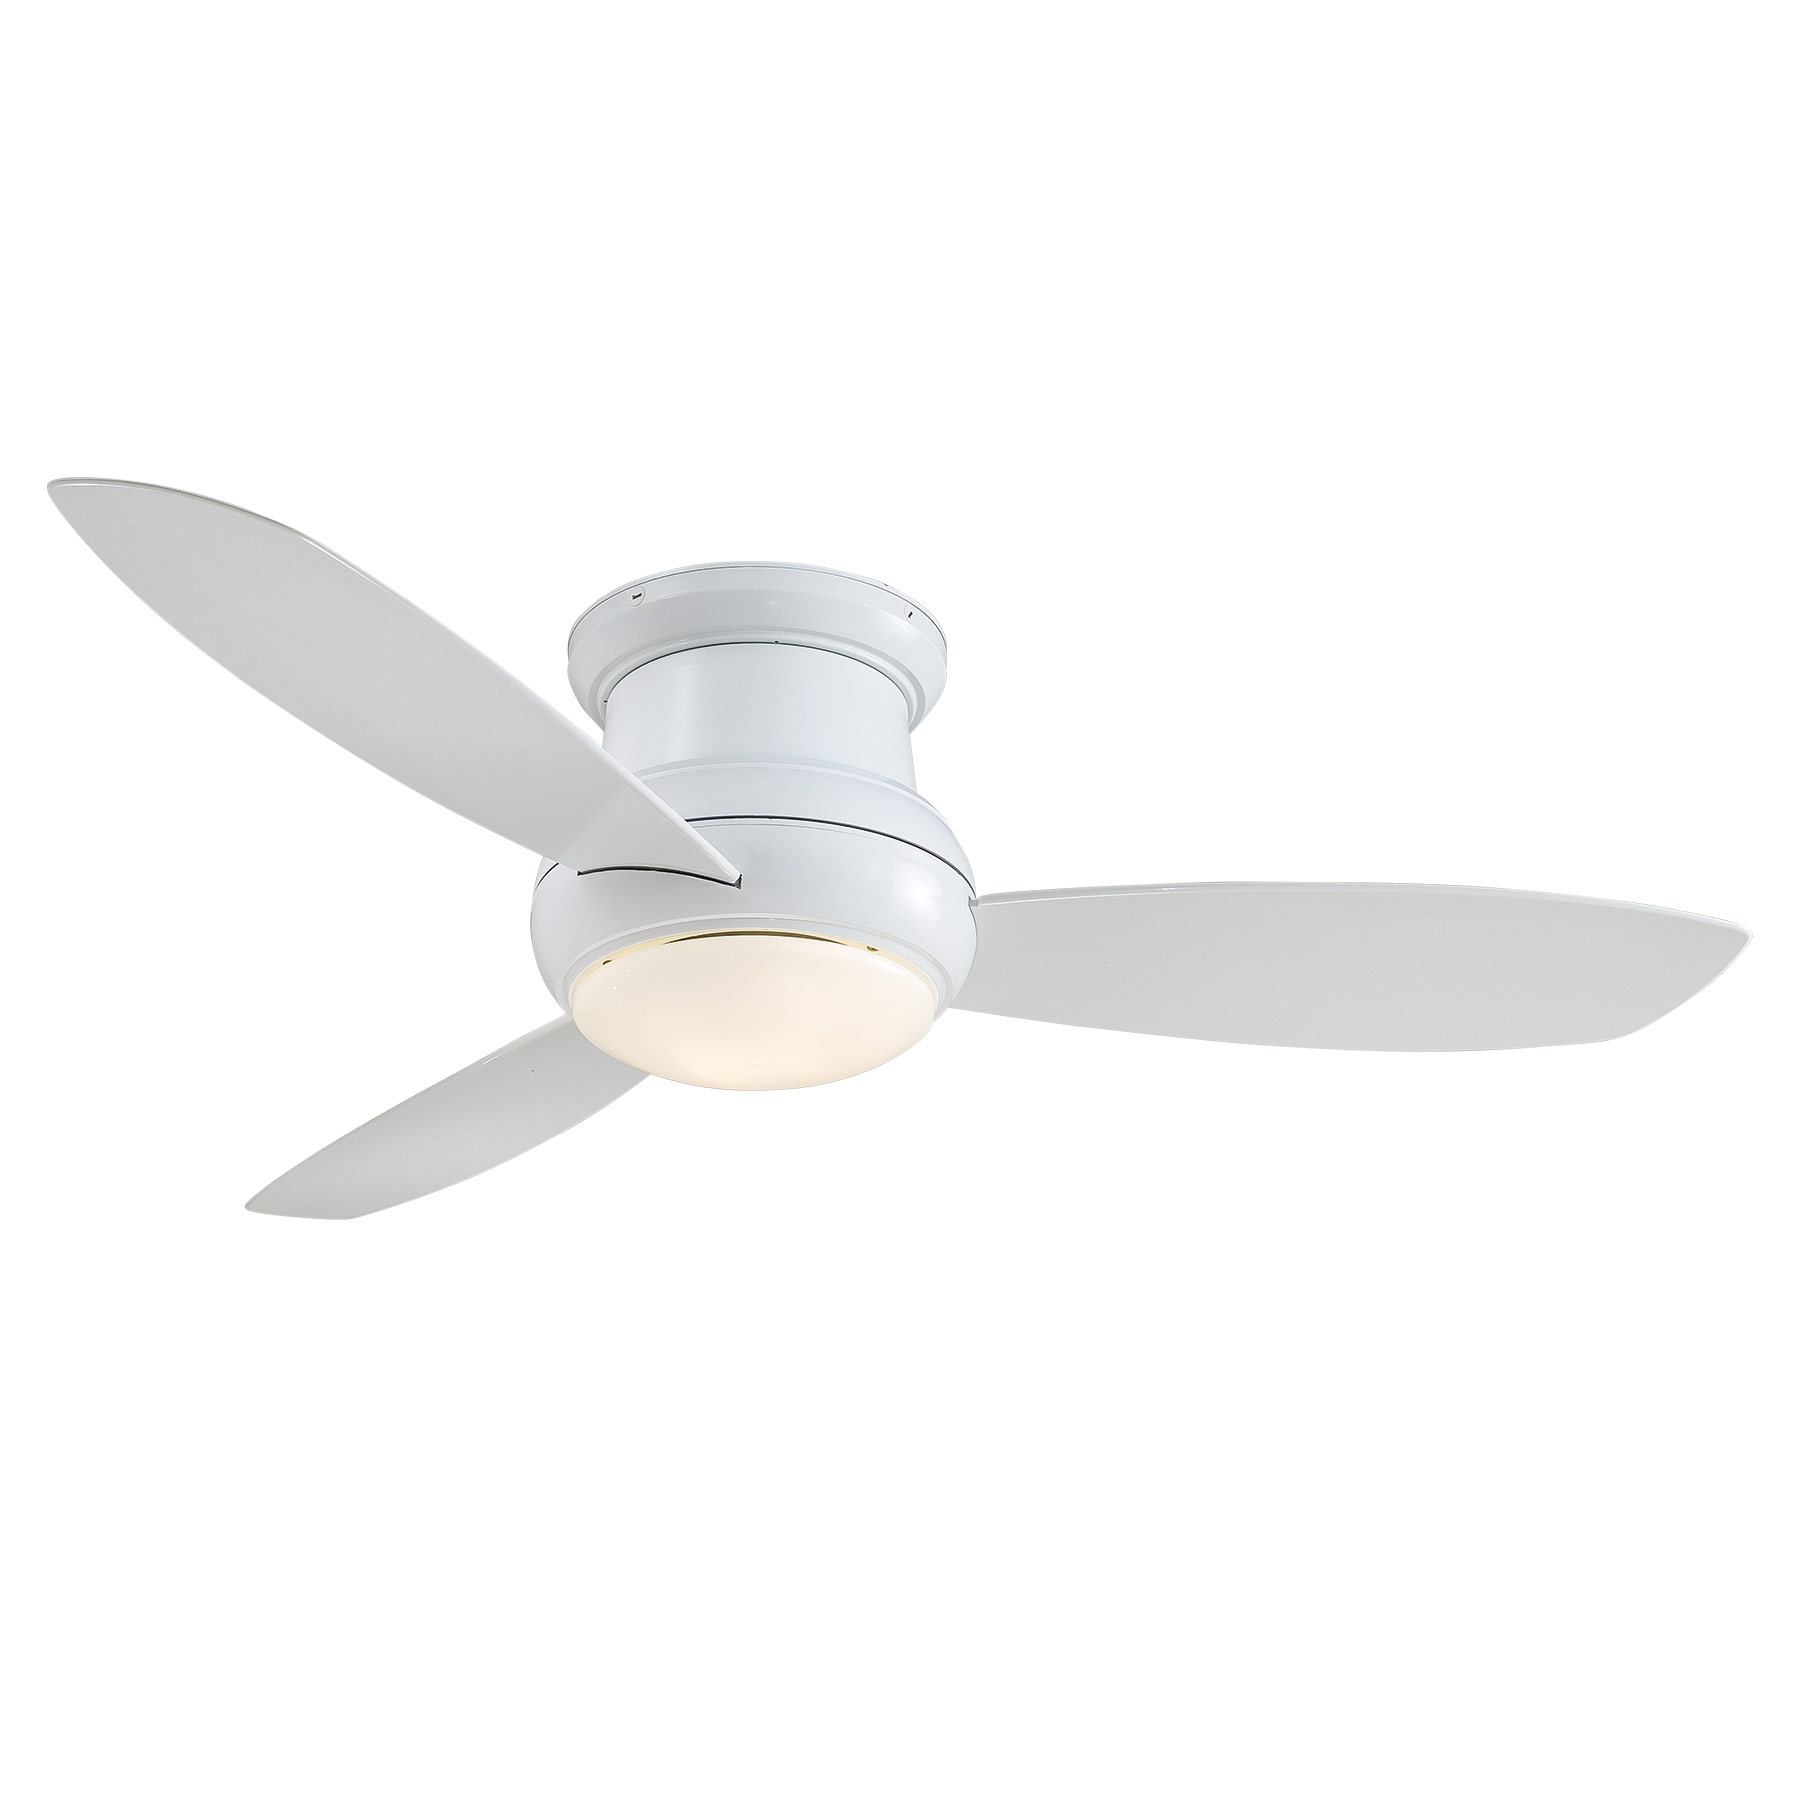 Concept Ii Outdoor Ceiling Fan With Light By Minka Aire F474l Wh